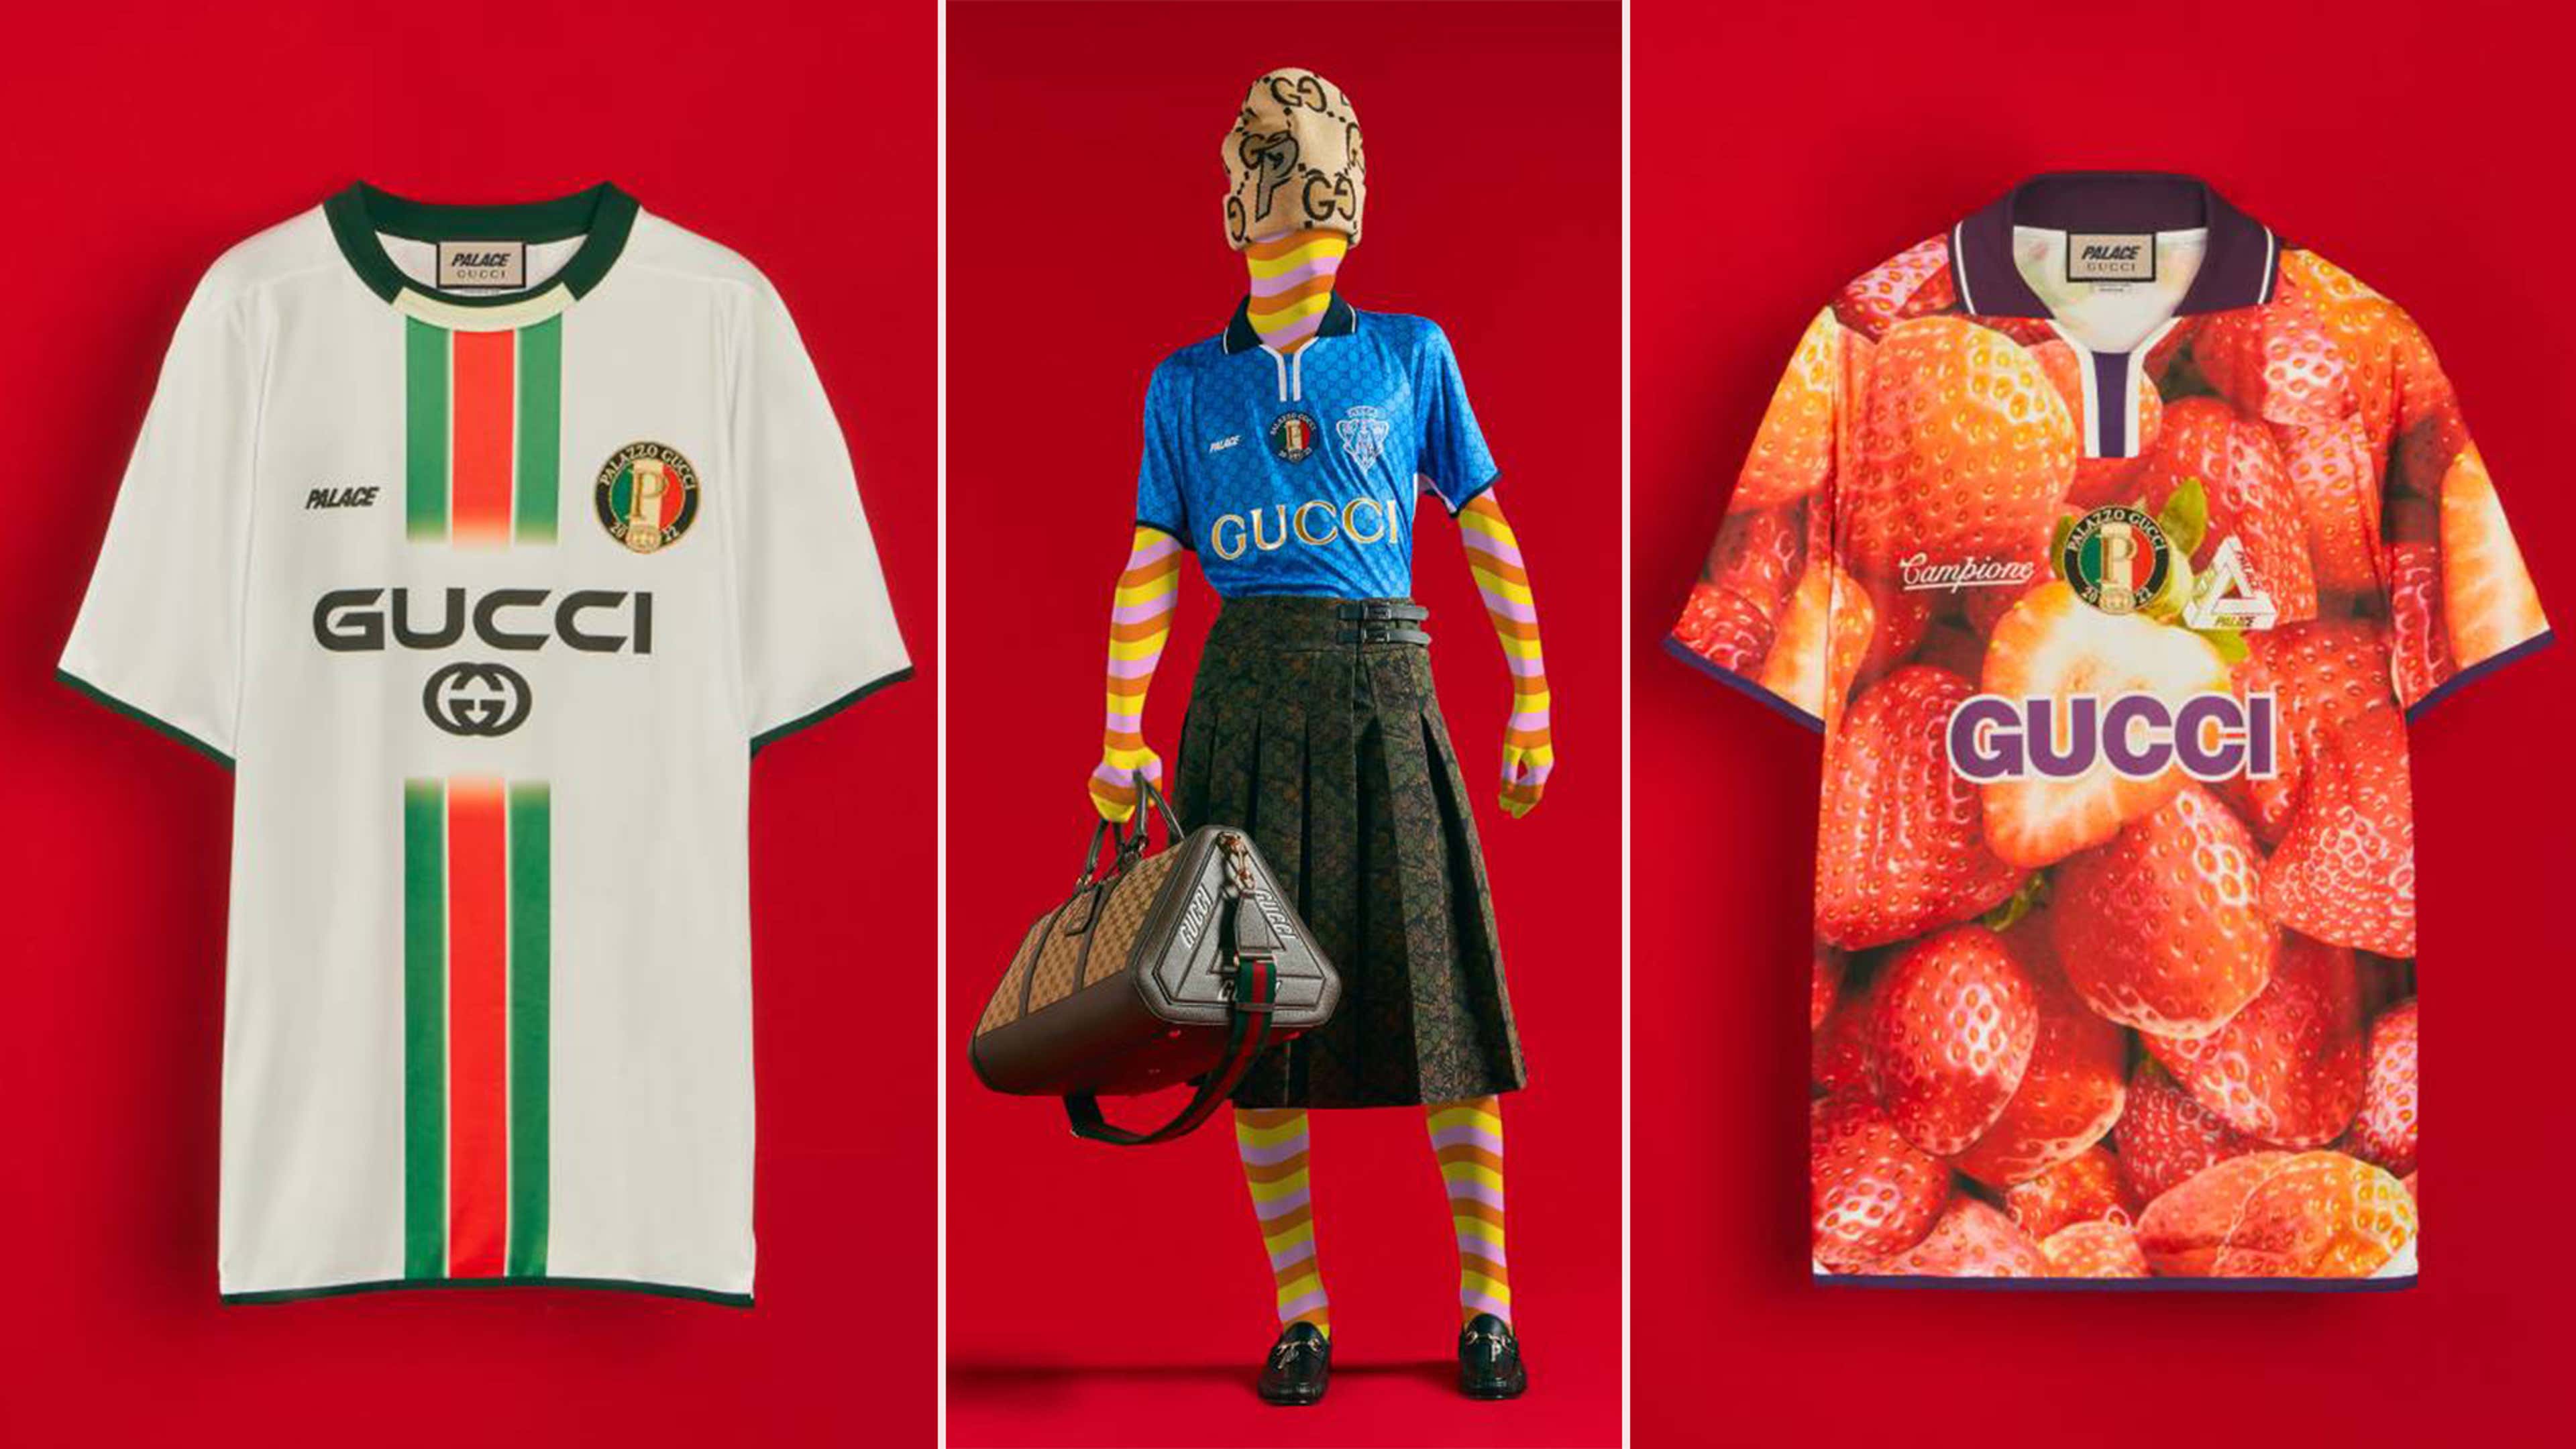 3 Gucci x Palace Football Kits Released - Inspired By Chelsea, Italy &  Strawberry Kit - Footy Headlines